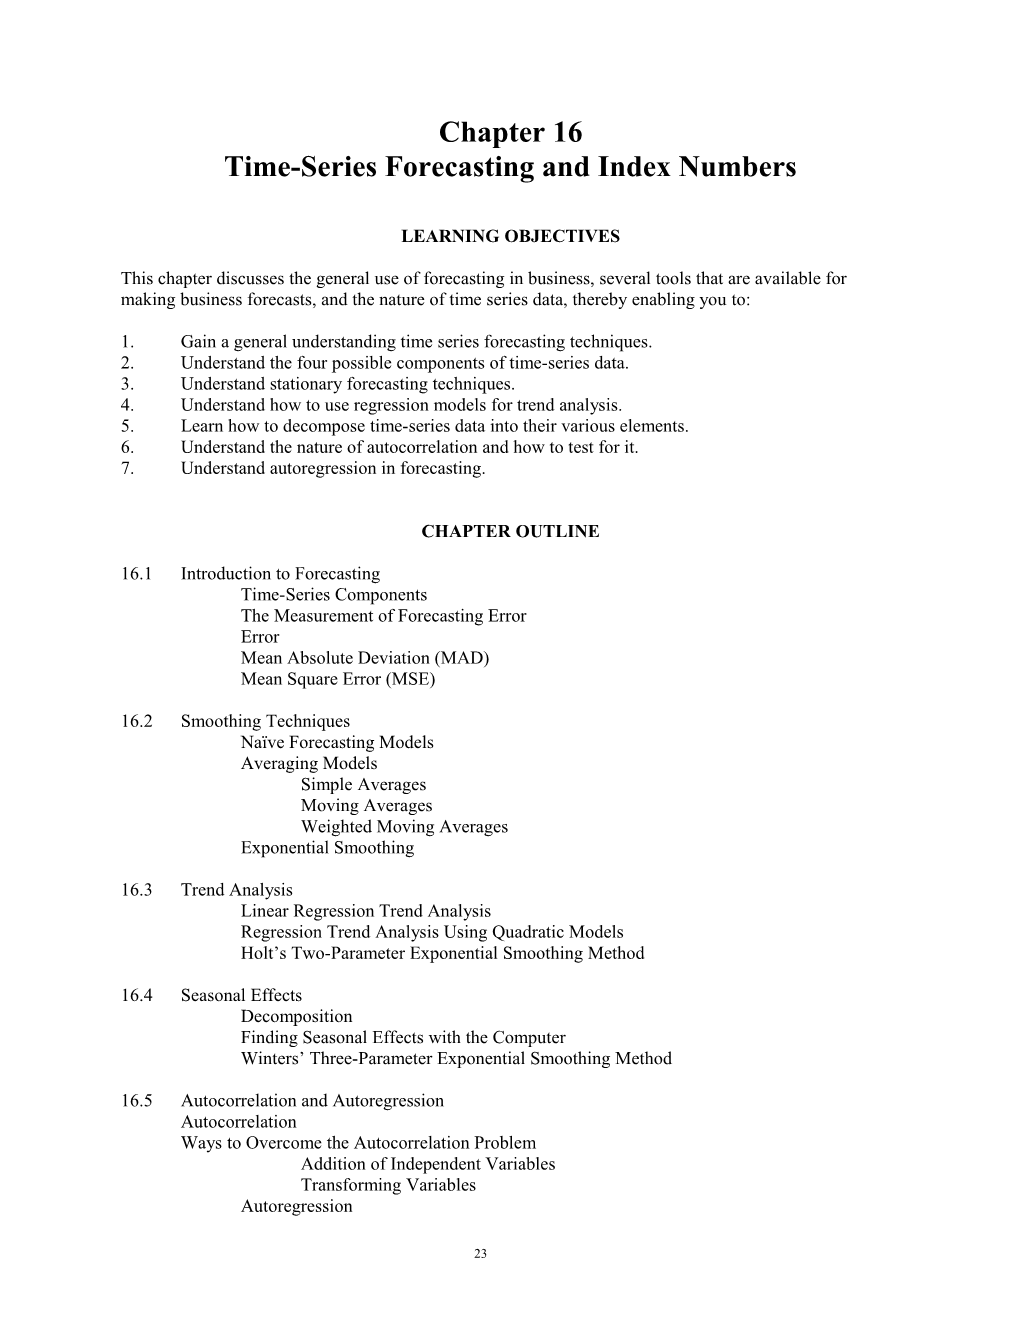 Chapter 16: Time Series Forecasting and Index Numbers 1